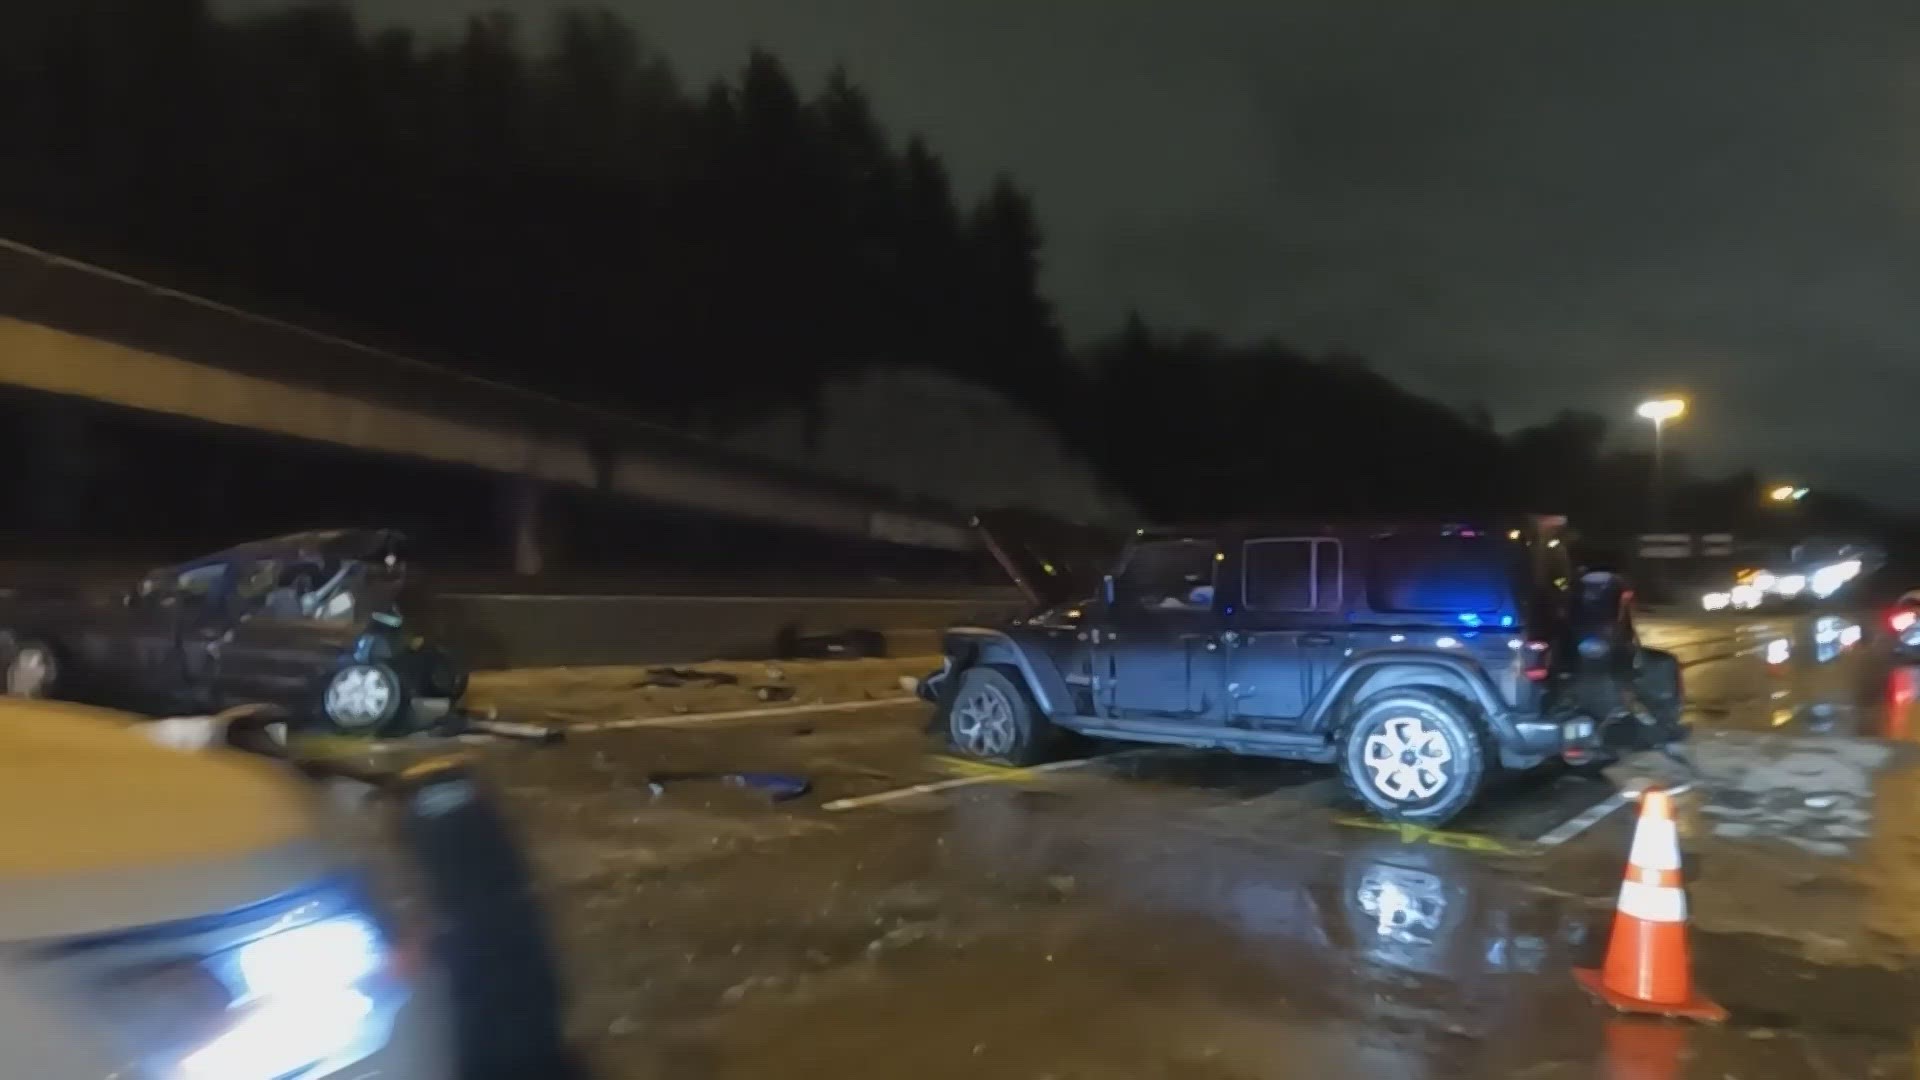 Witnesses said the driver, 21-year-old Antonio Lopez, was driving at an "extreme speed" on a snowy night in Seattle when conditions on I-5 were "slushy and slick."